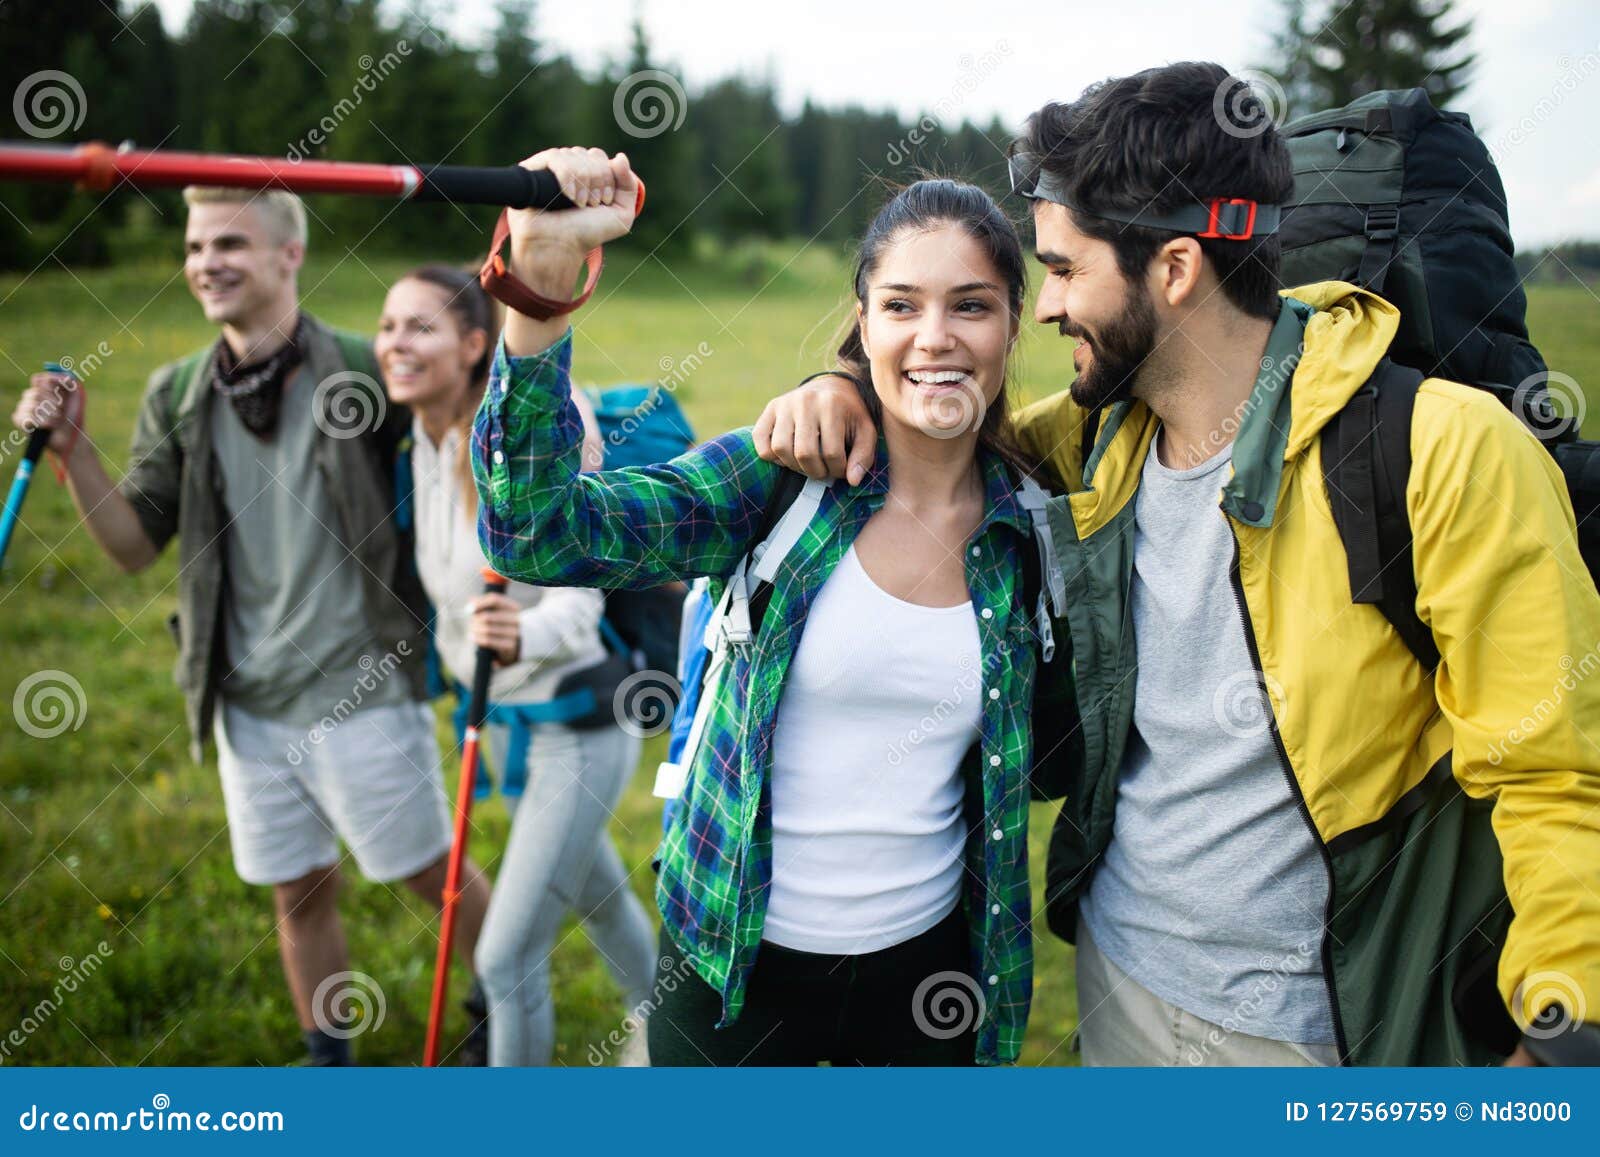 Friends Hiking Together Outdoors Exploring the Wilderness Stock Image ...